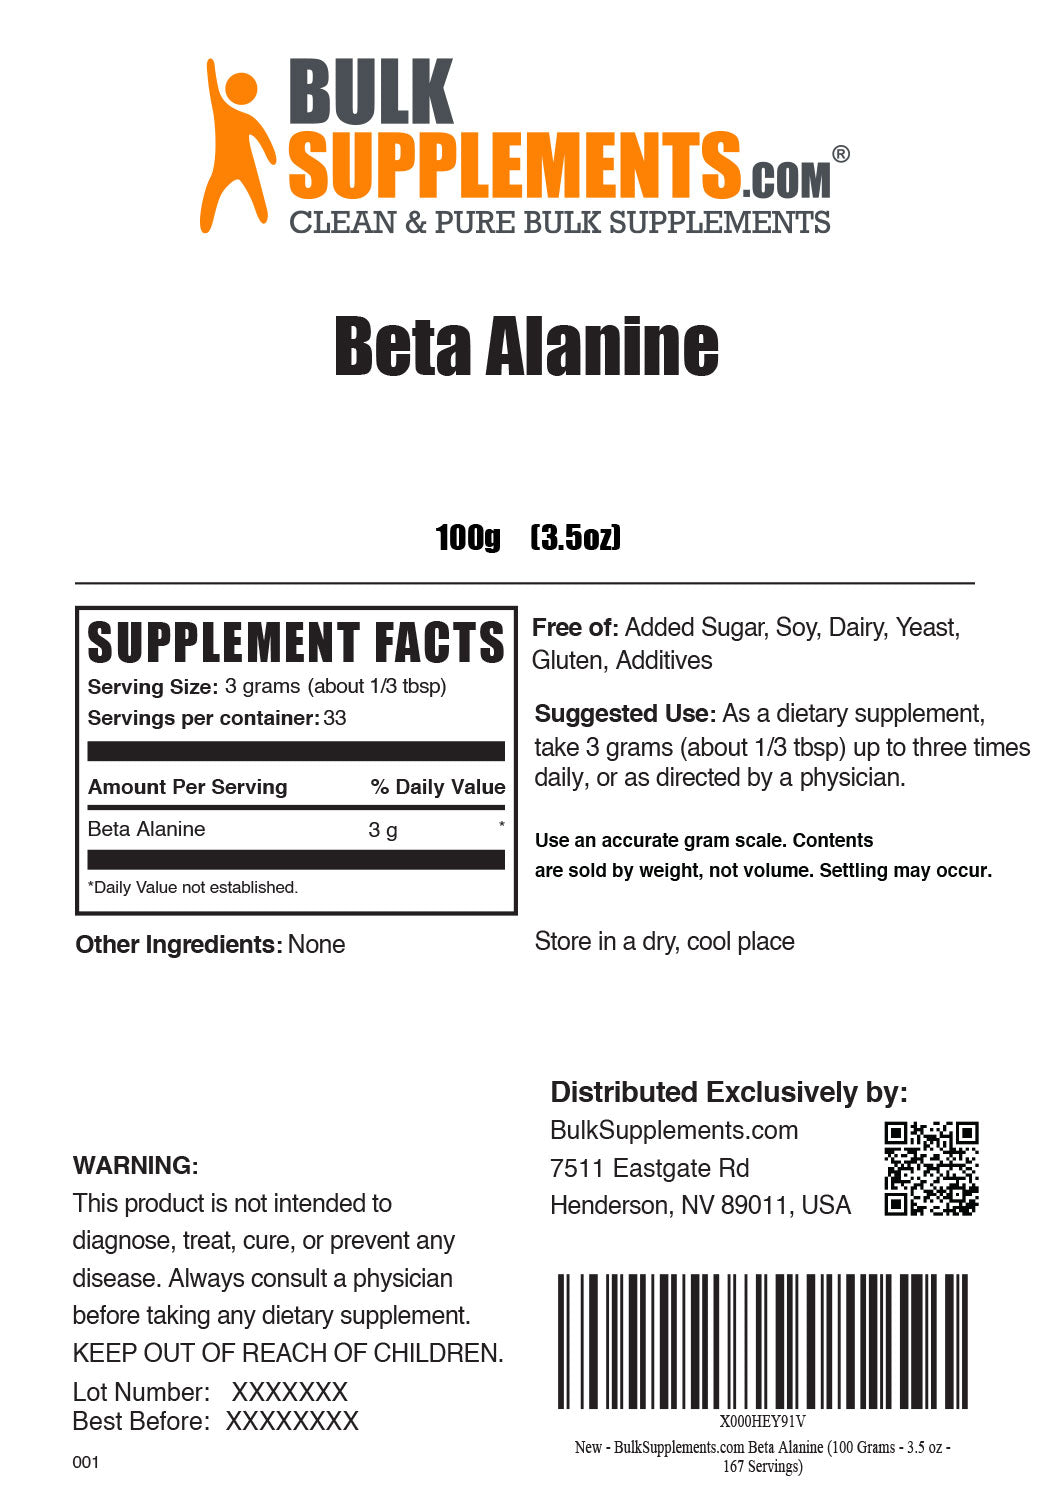 Beta Alanine Supplement Facts for 100g Bag